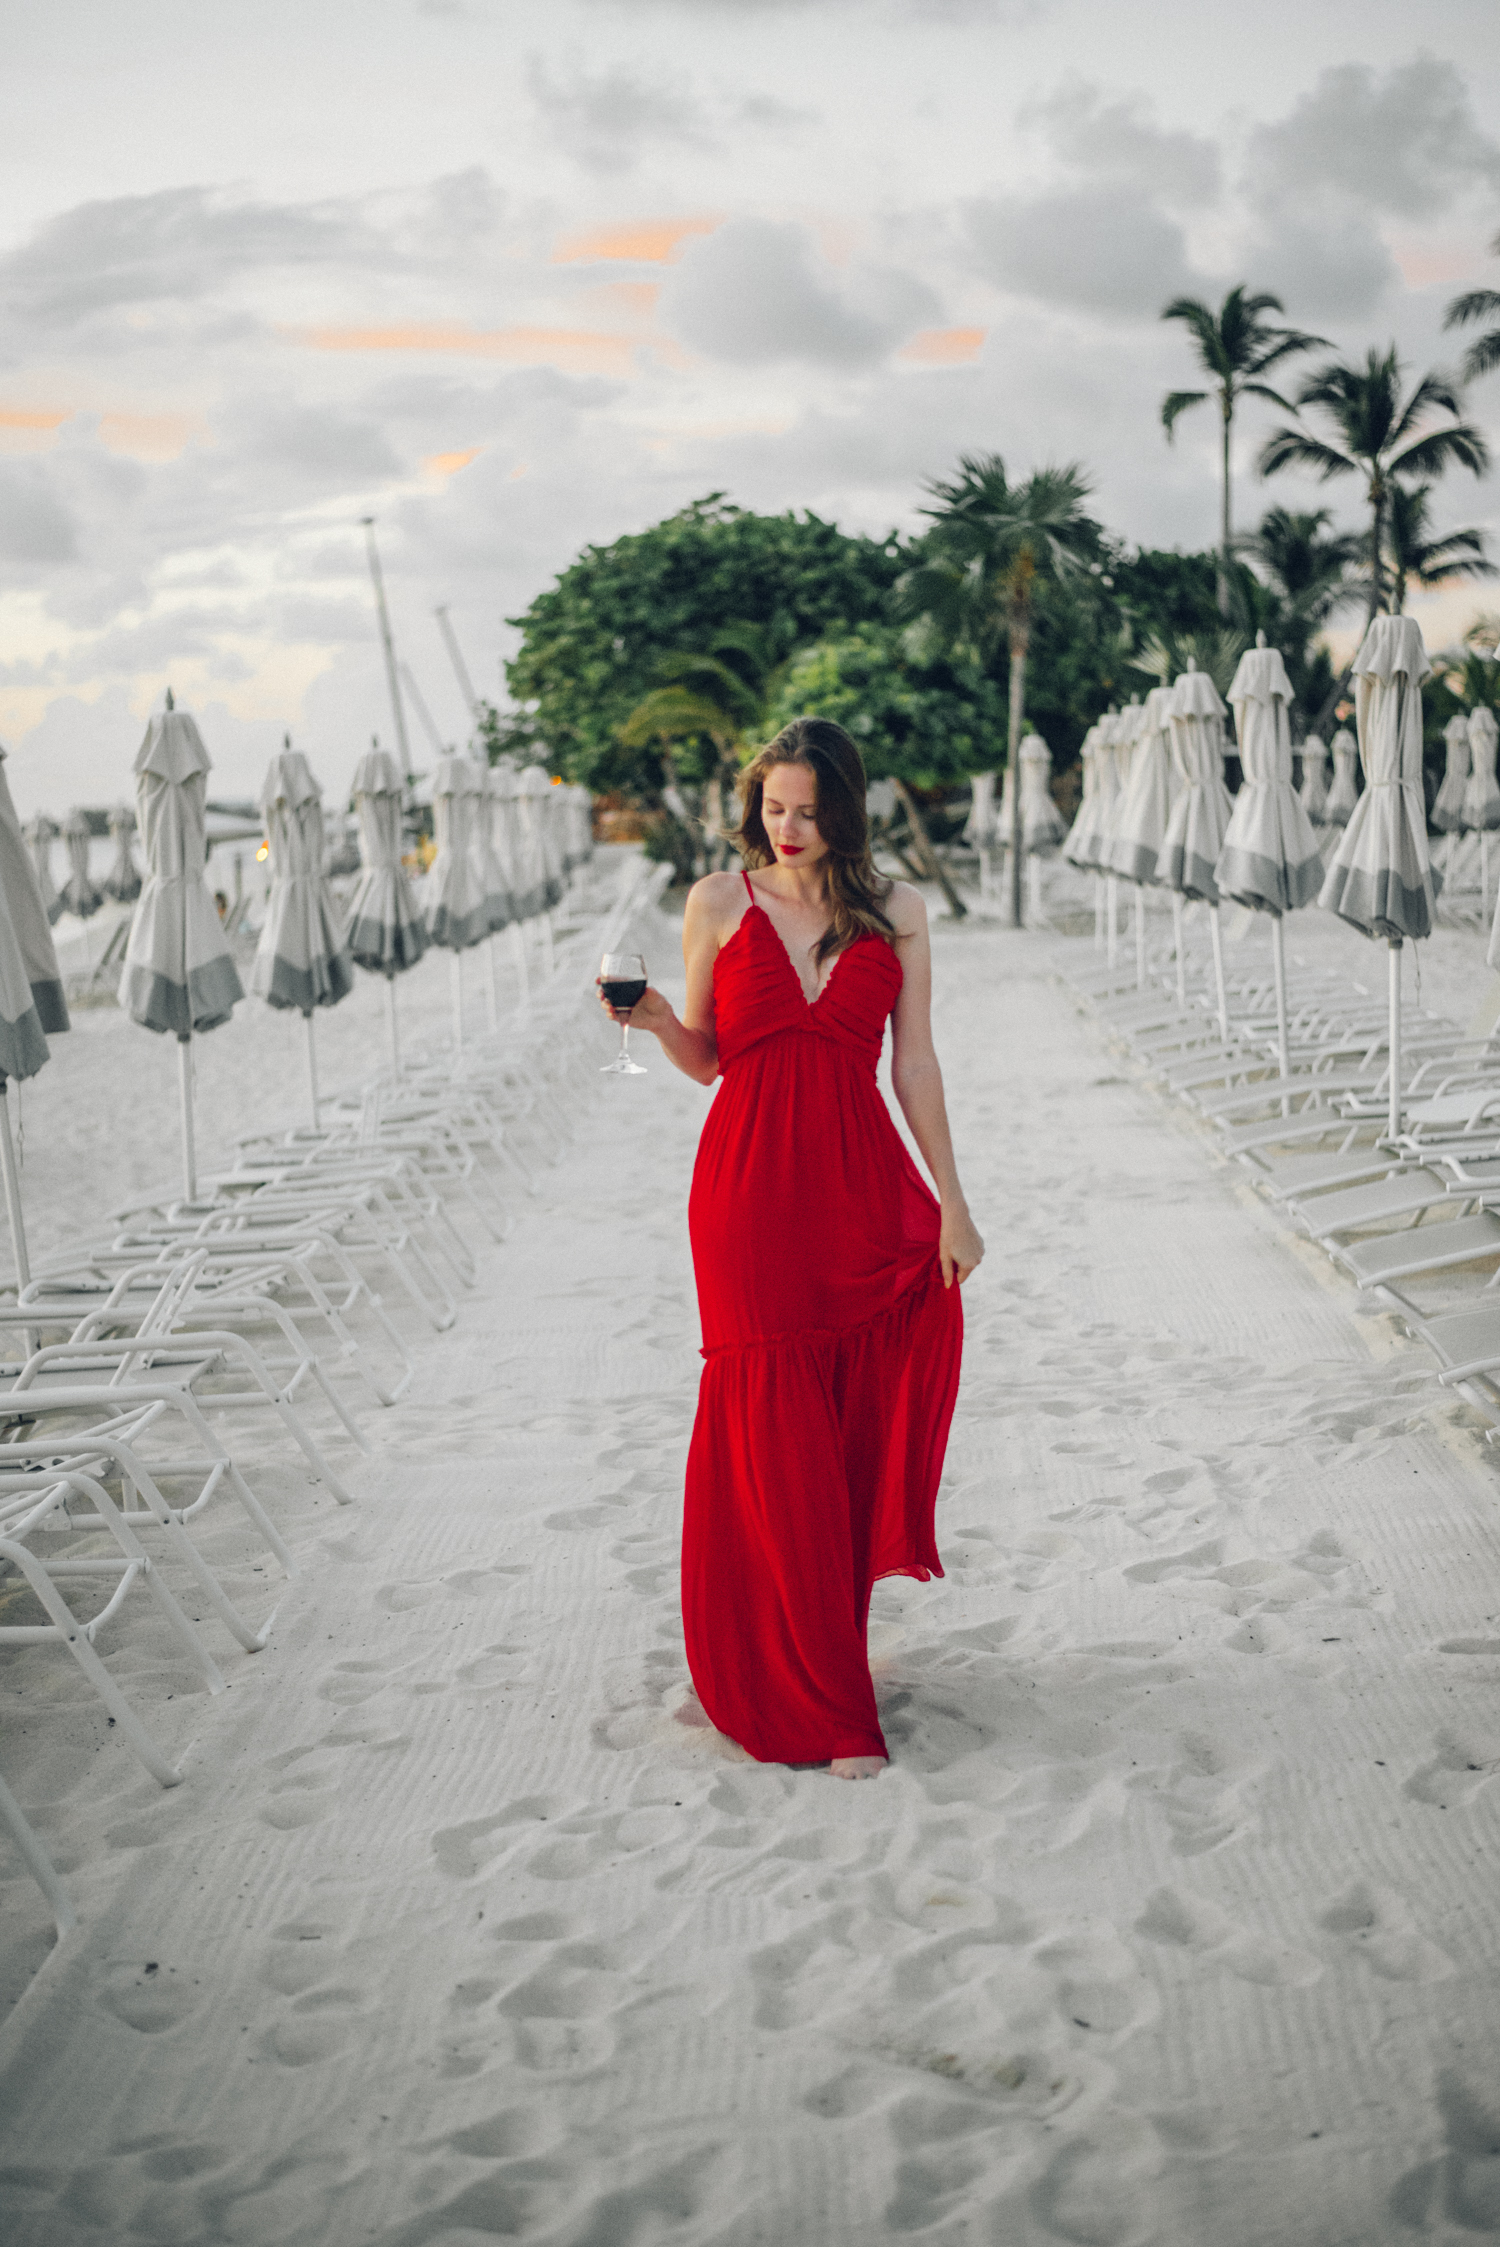 Alyssa Campanella of The A List blog visits Cayman Islands and stays at the Kimpton Seafire Resort wearing Majorelle Tony Gown from Revolve